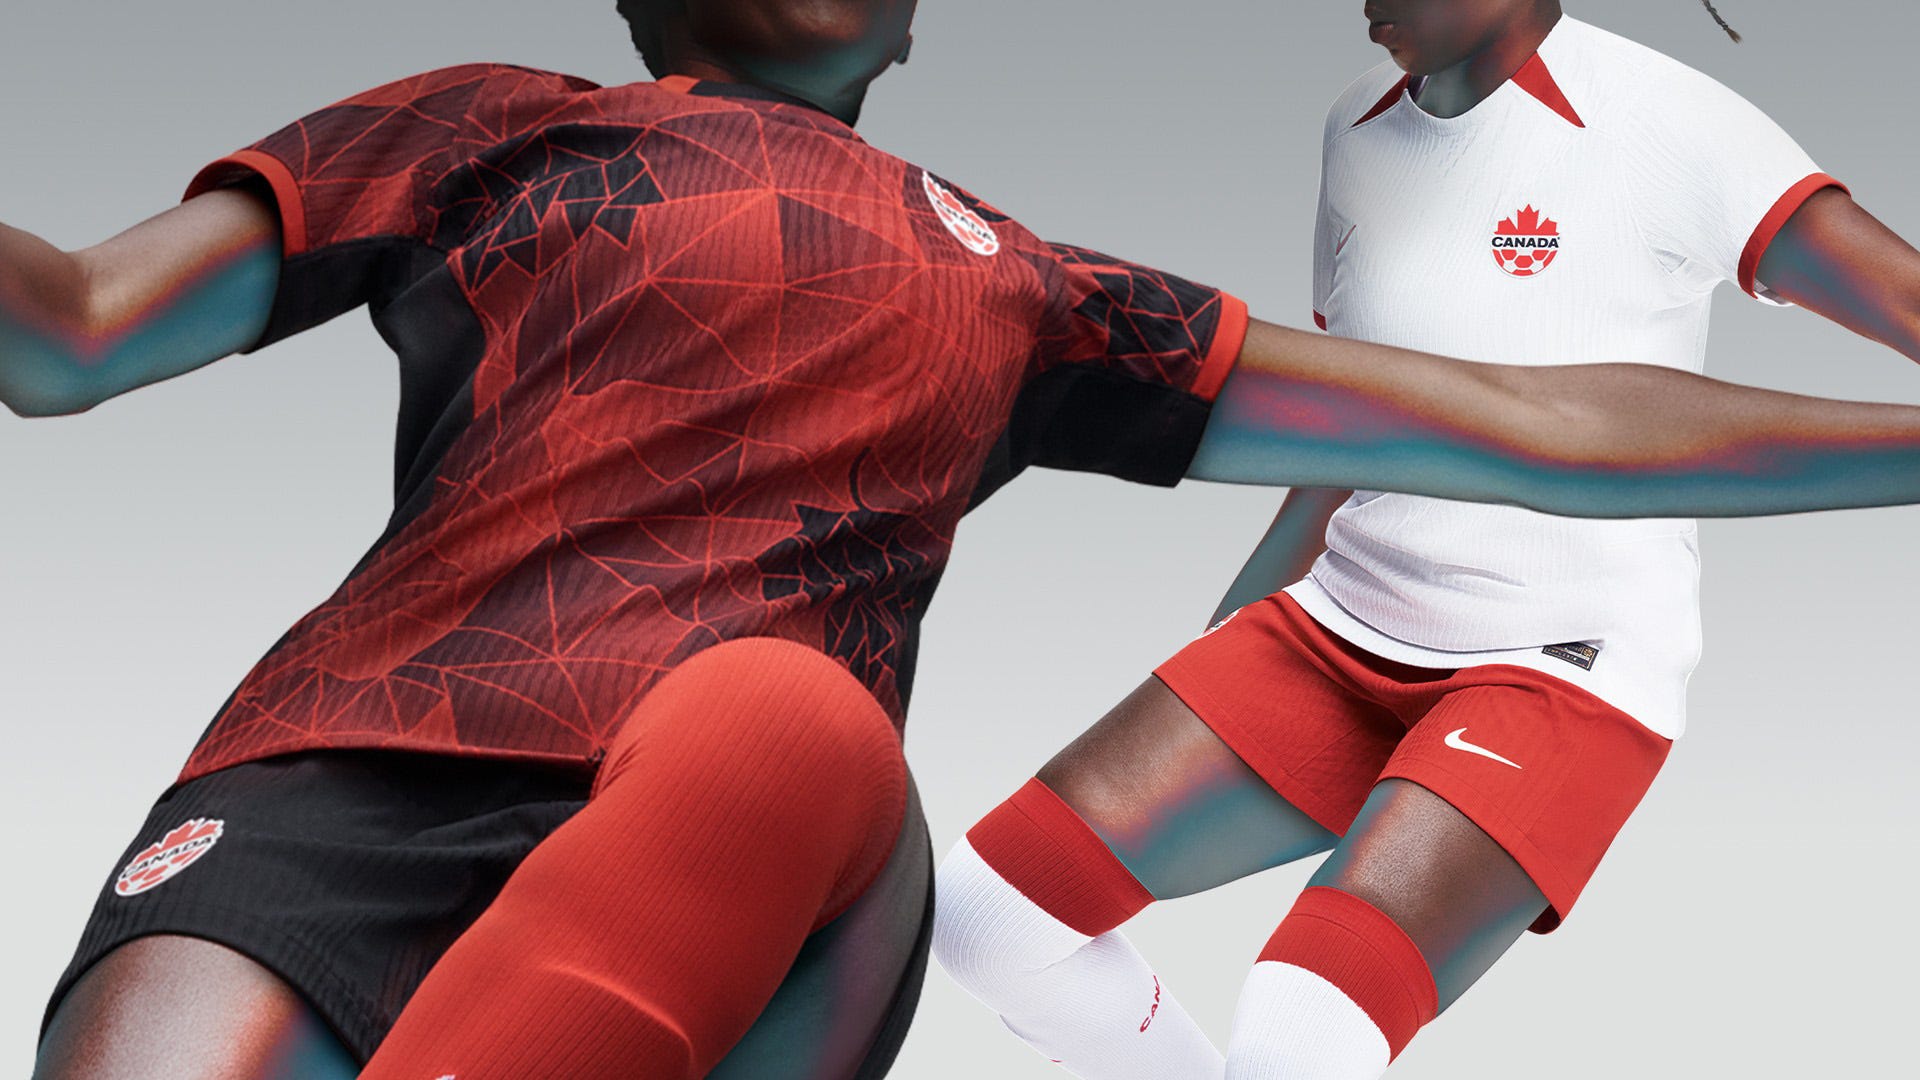 Lionesses World Cup 2023 Kits Numbers & Lettering Digital 